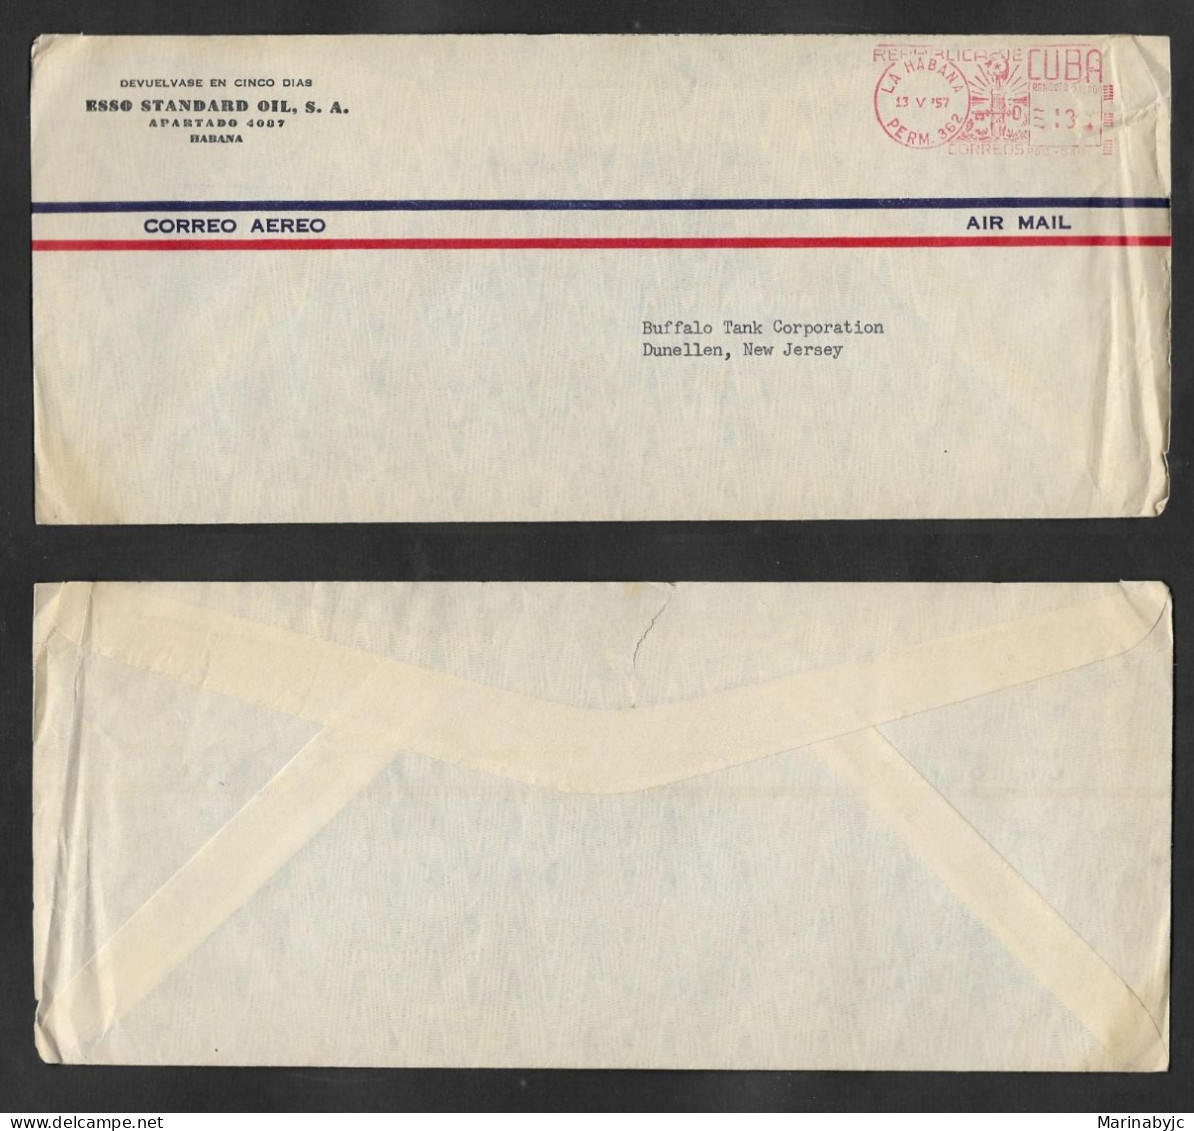 SE)1957 CUBA, COMMERCIAL ENVELOPE WITH MECHANICAL POSTAGE CUBA, AIR MAIL, CIRCULATED FROM HAVANA TO NEW JERSEY, VF - Used Stamps